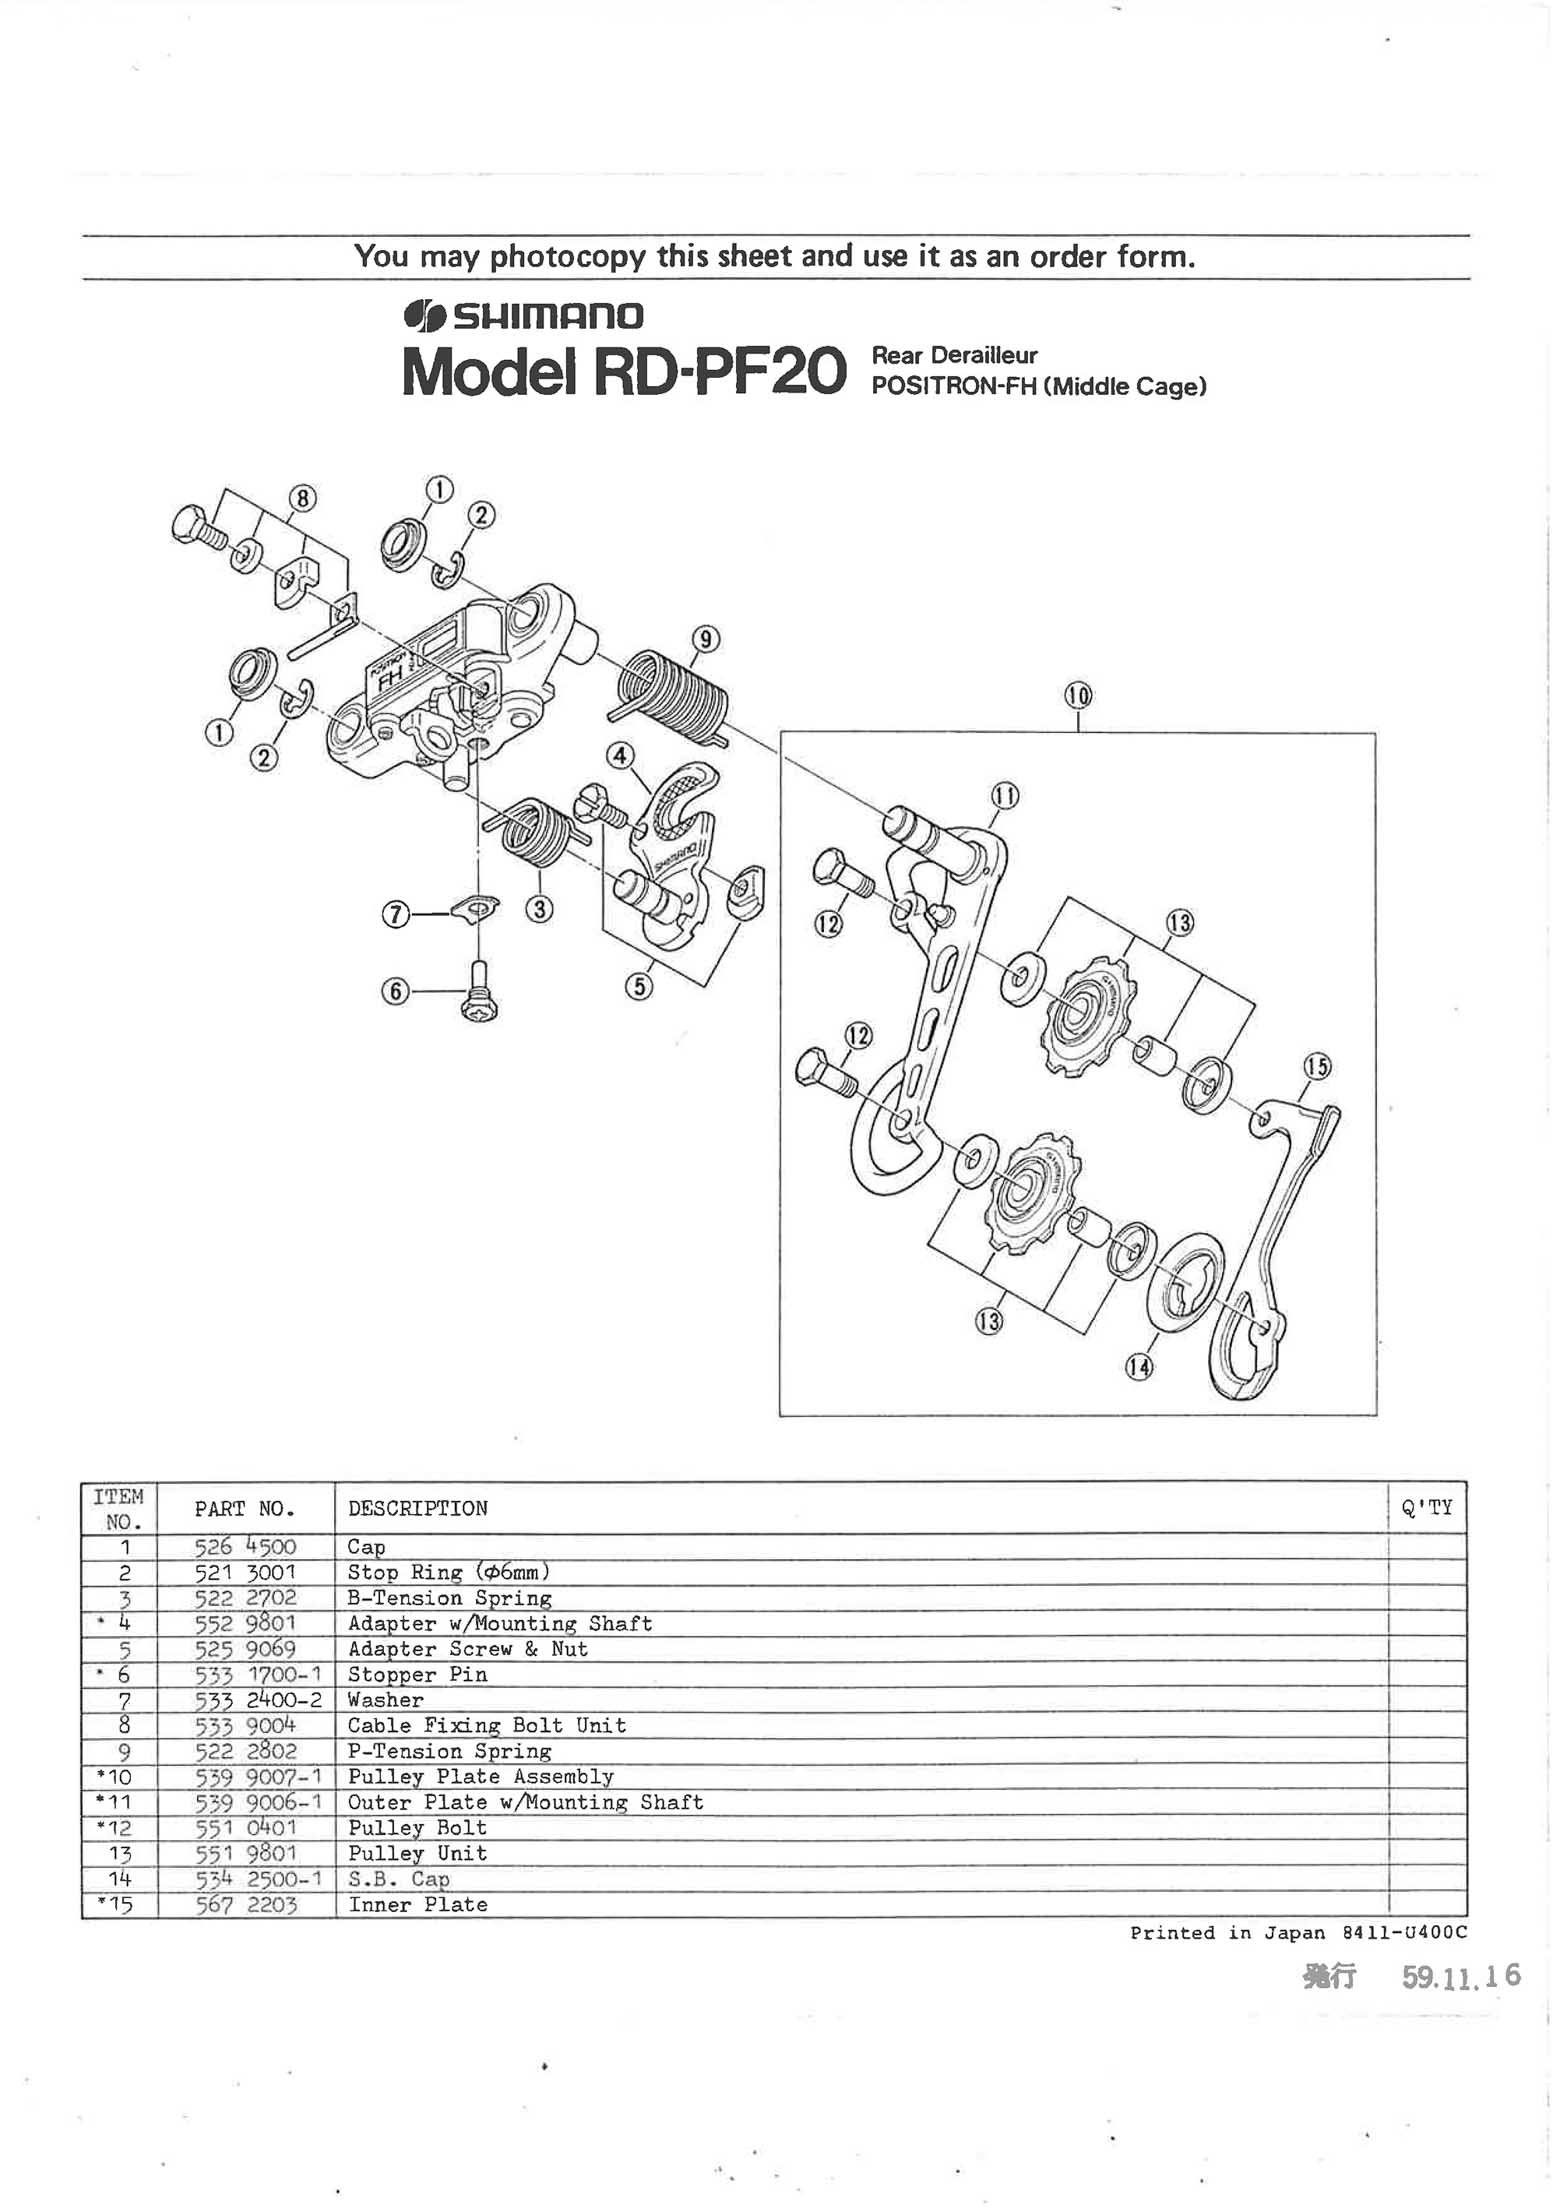 Shimano web site 2020 - exploded views from 1984 Positron FH GS (PF20) 2nd version main image